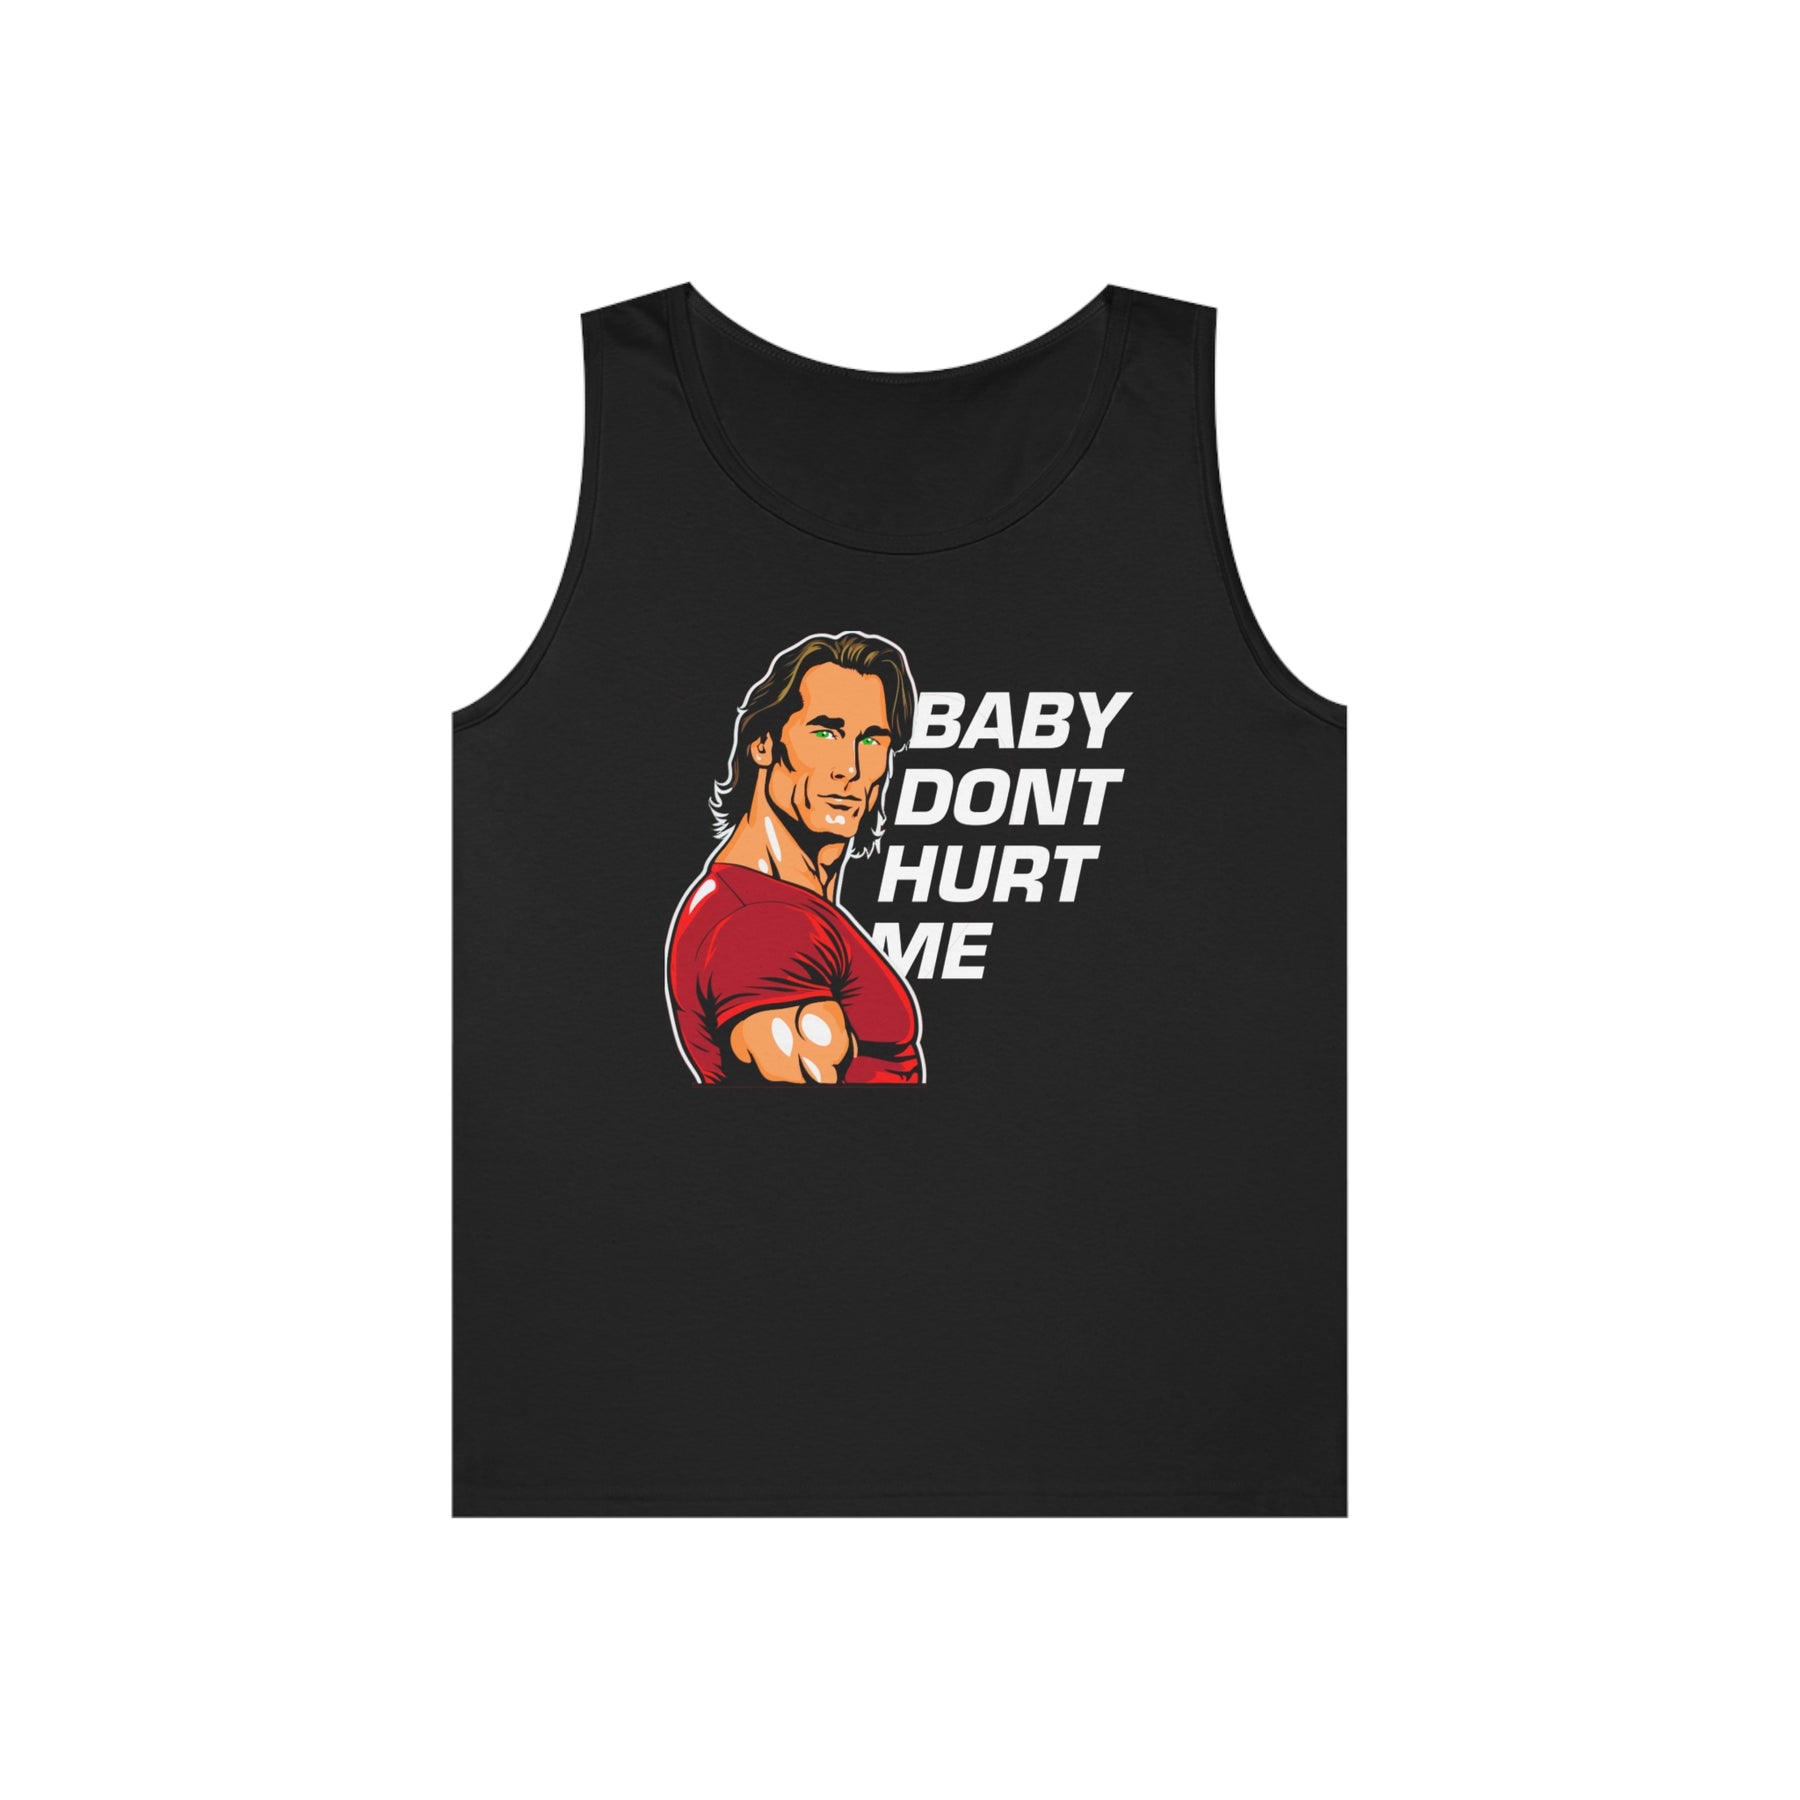 Baby dont hurt me tank top – MikeOHearnLifestyle.com